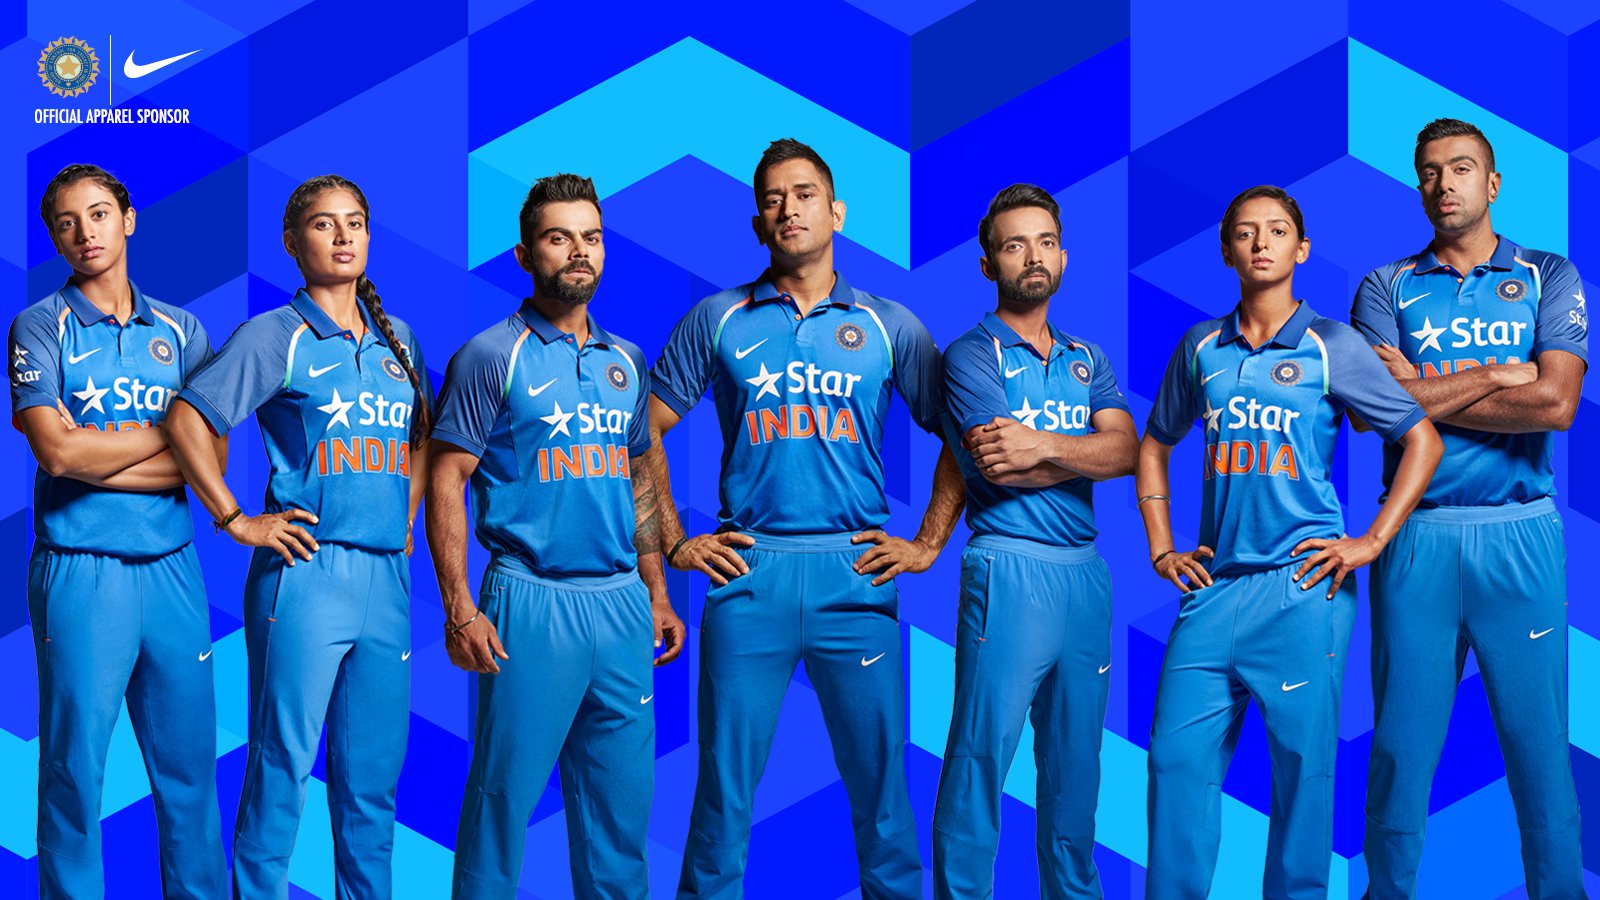 Brand New Team India Cricket Jerseys Are Out & They Look Pretty Kickass